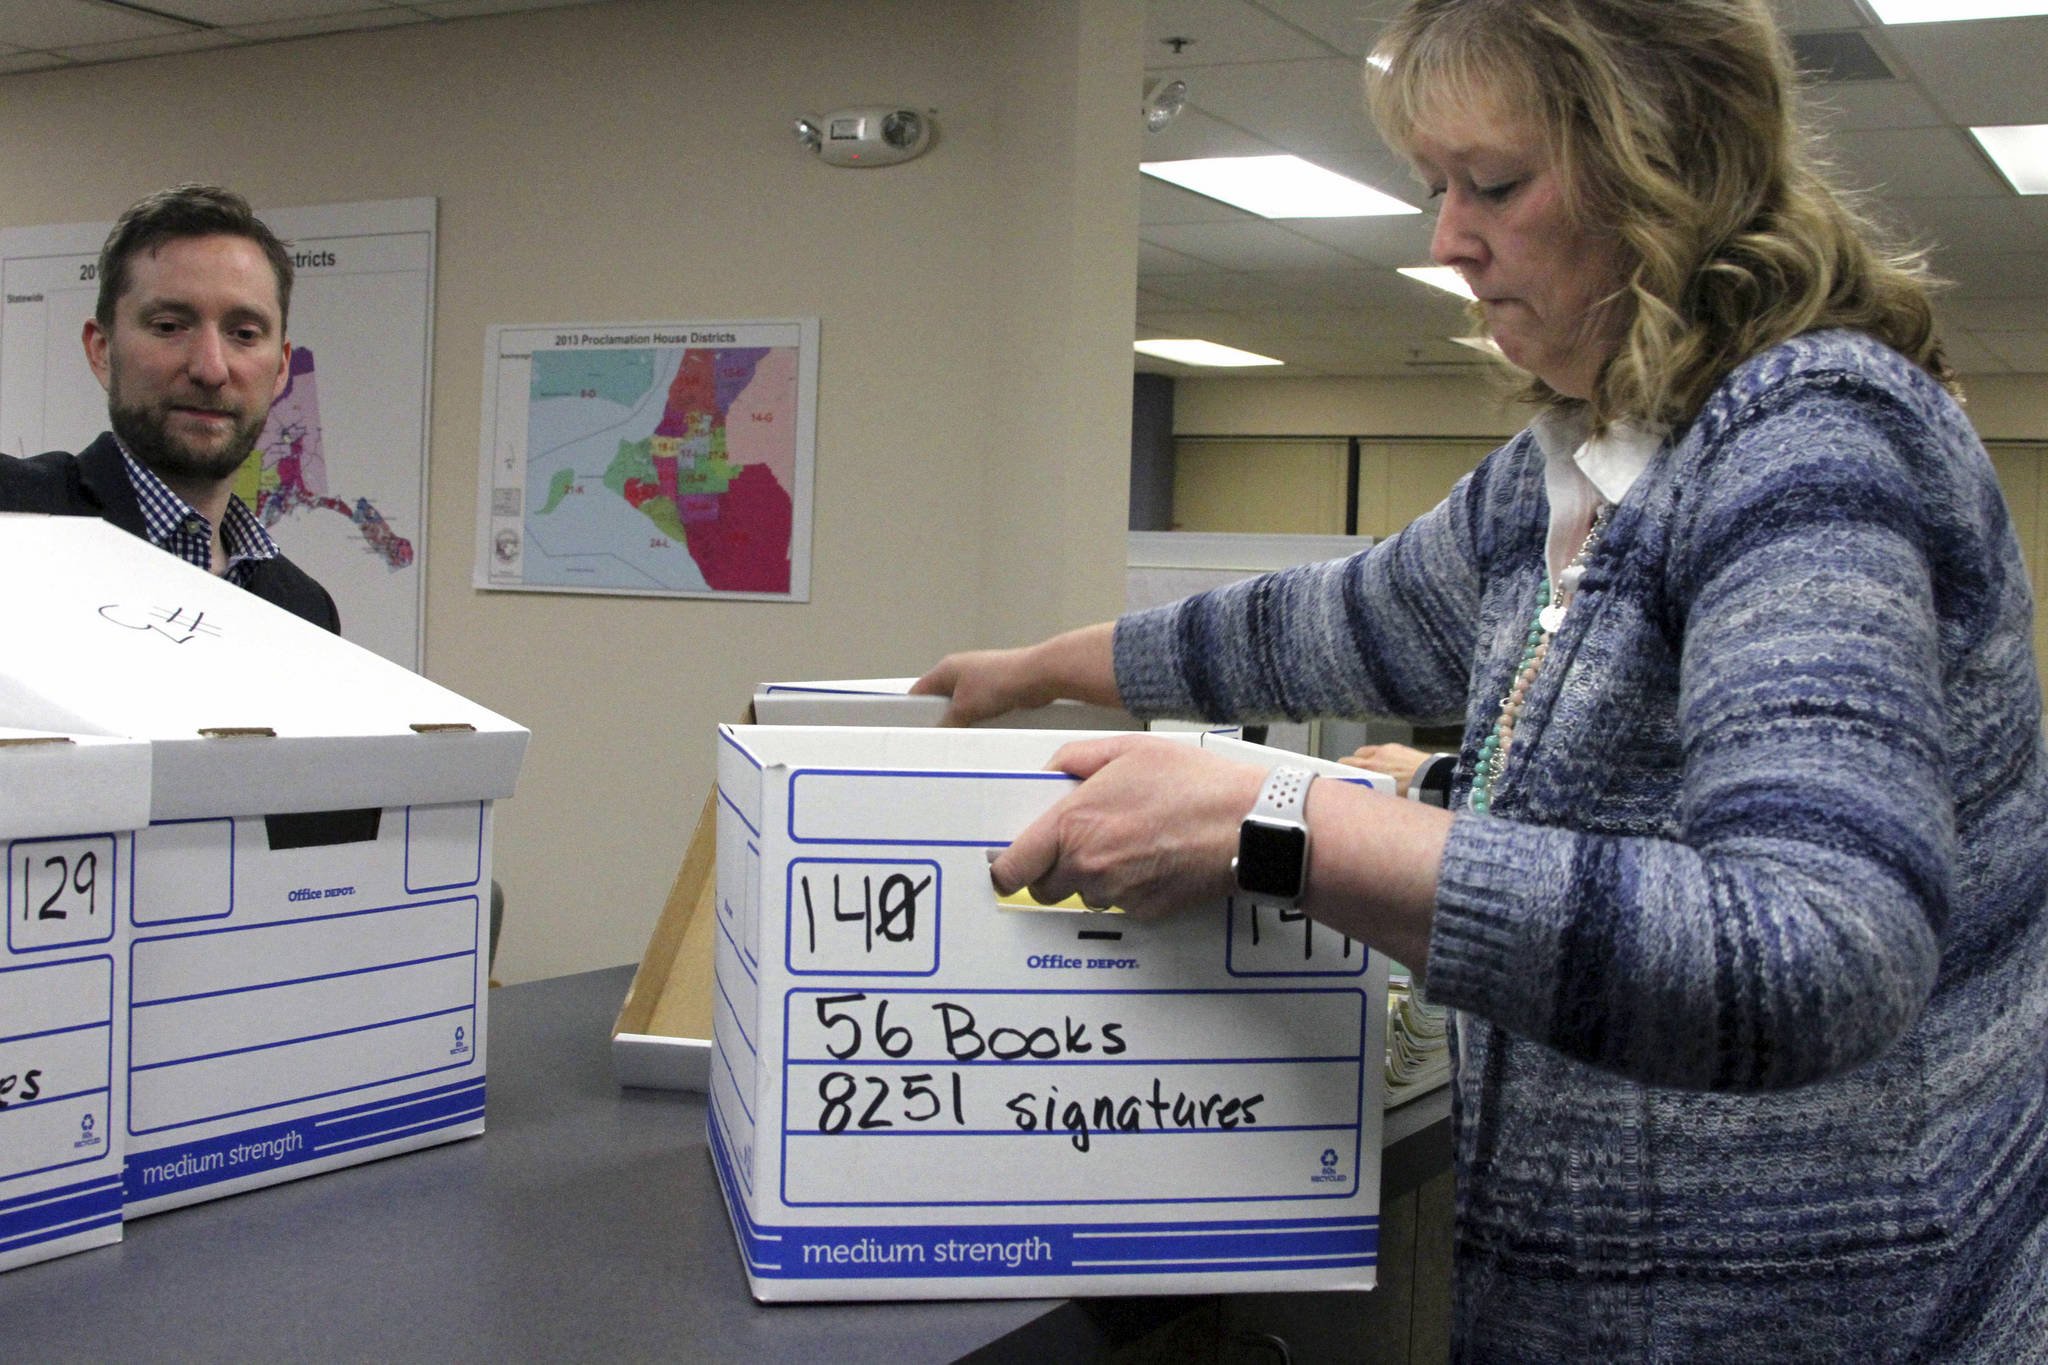 Rep. Jason Grenn, I-Anchorage, left, looks on as Carol Thompson with the state Division of Elections in Anchorage, unseals boxes containing more than 45,000 signatures, Friday, Jan. 12, 2018. Elections workers will have to verify the signatures before the measure is approved for the ballot. (Mark Thiessen | The Associated Press)